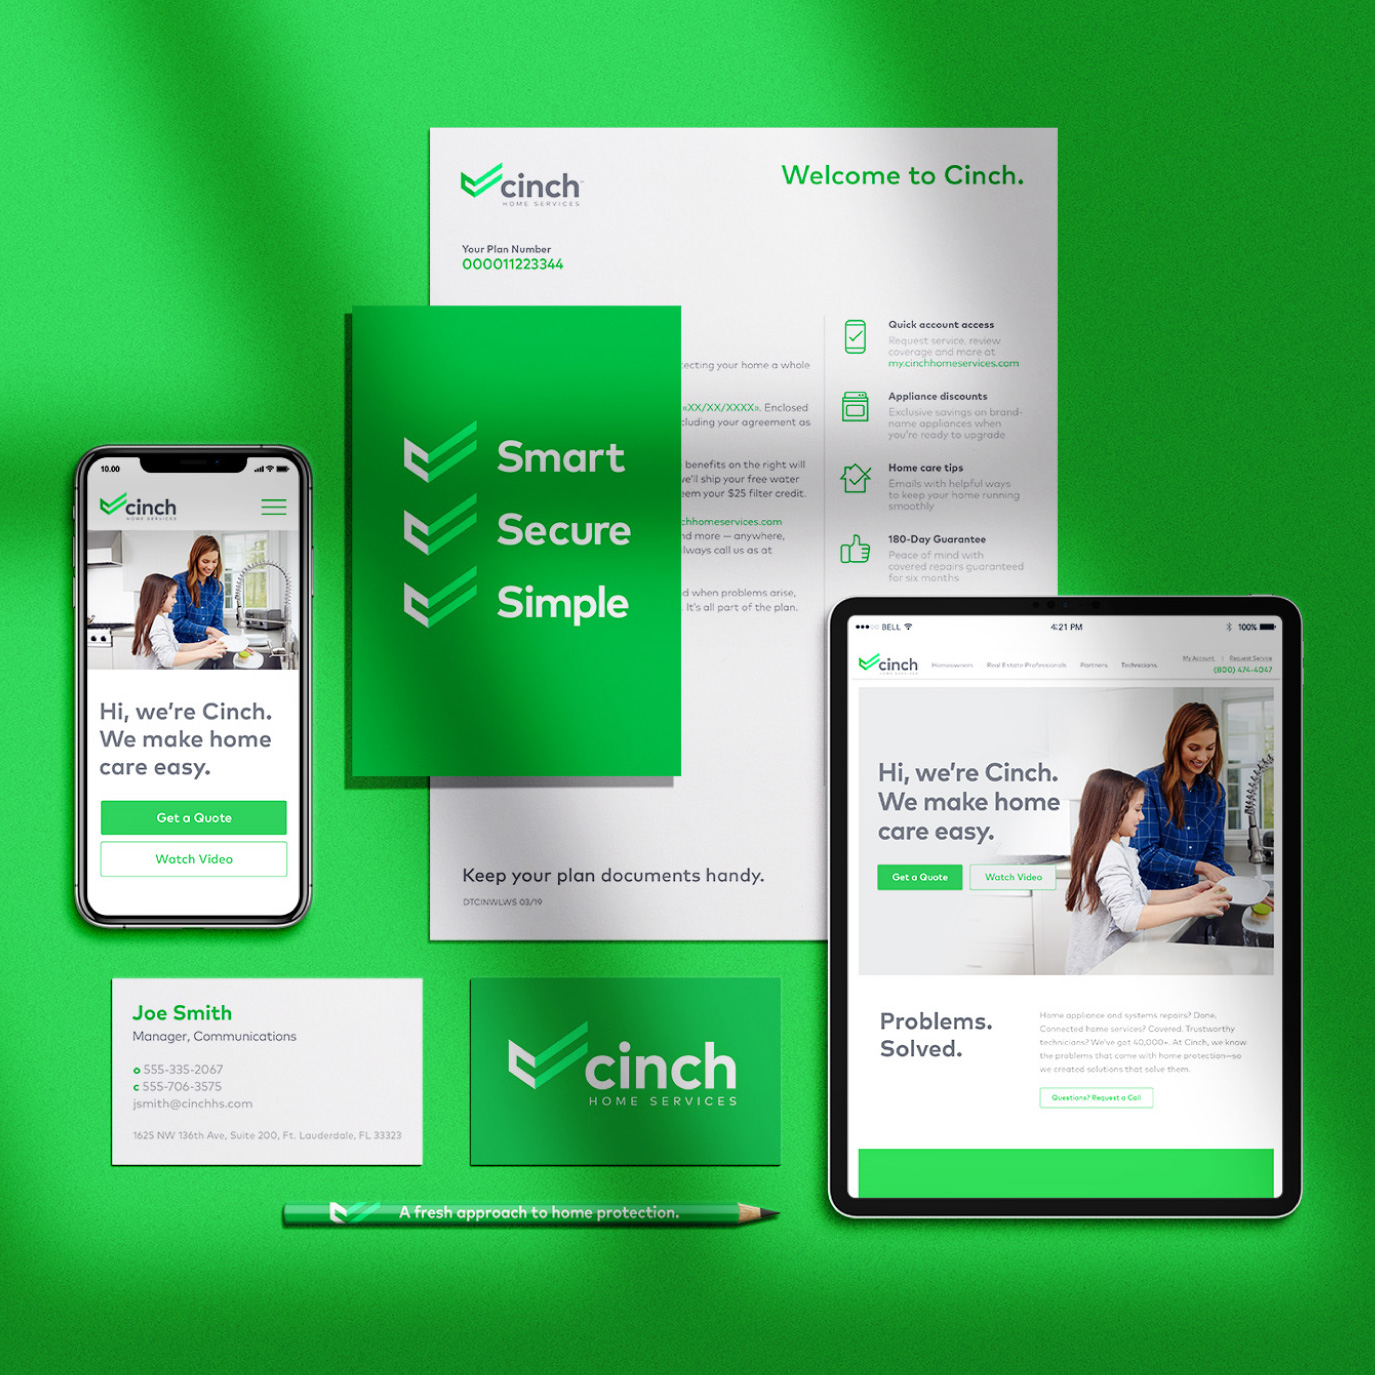 Cinch Home Services